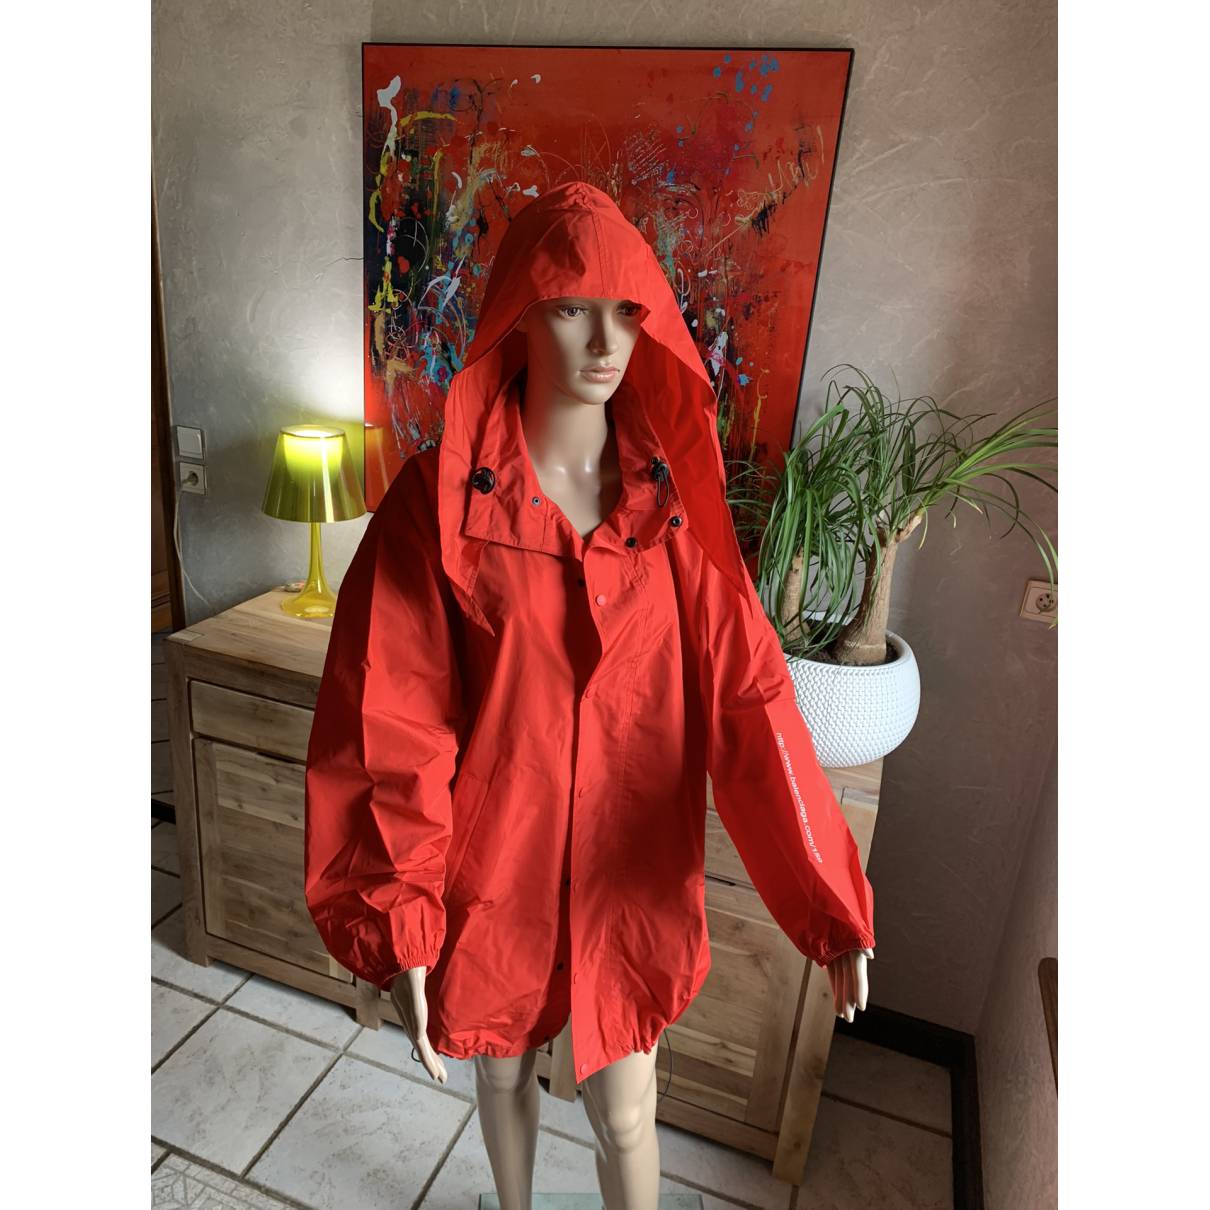 Balenciaga - Authenticated Tracksuit Jacket - Polyester Red Plain for Women, Very Good Condition